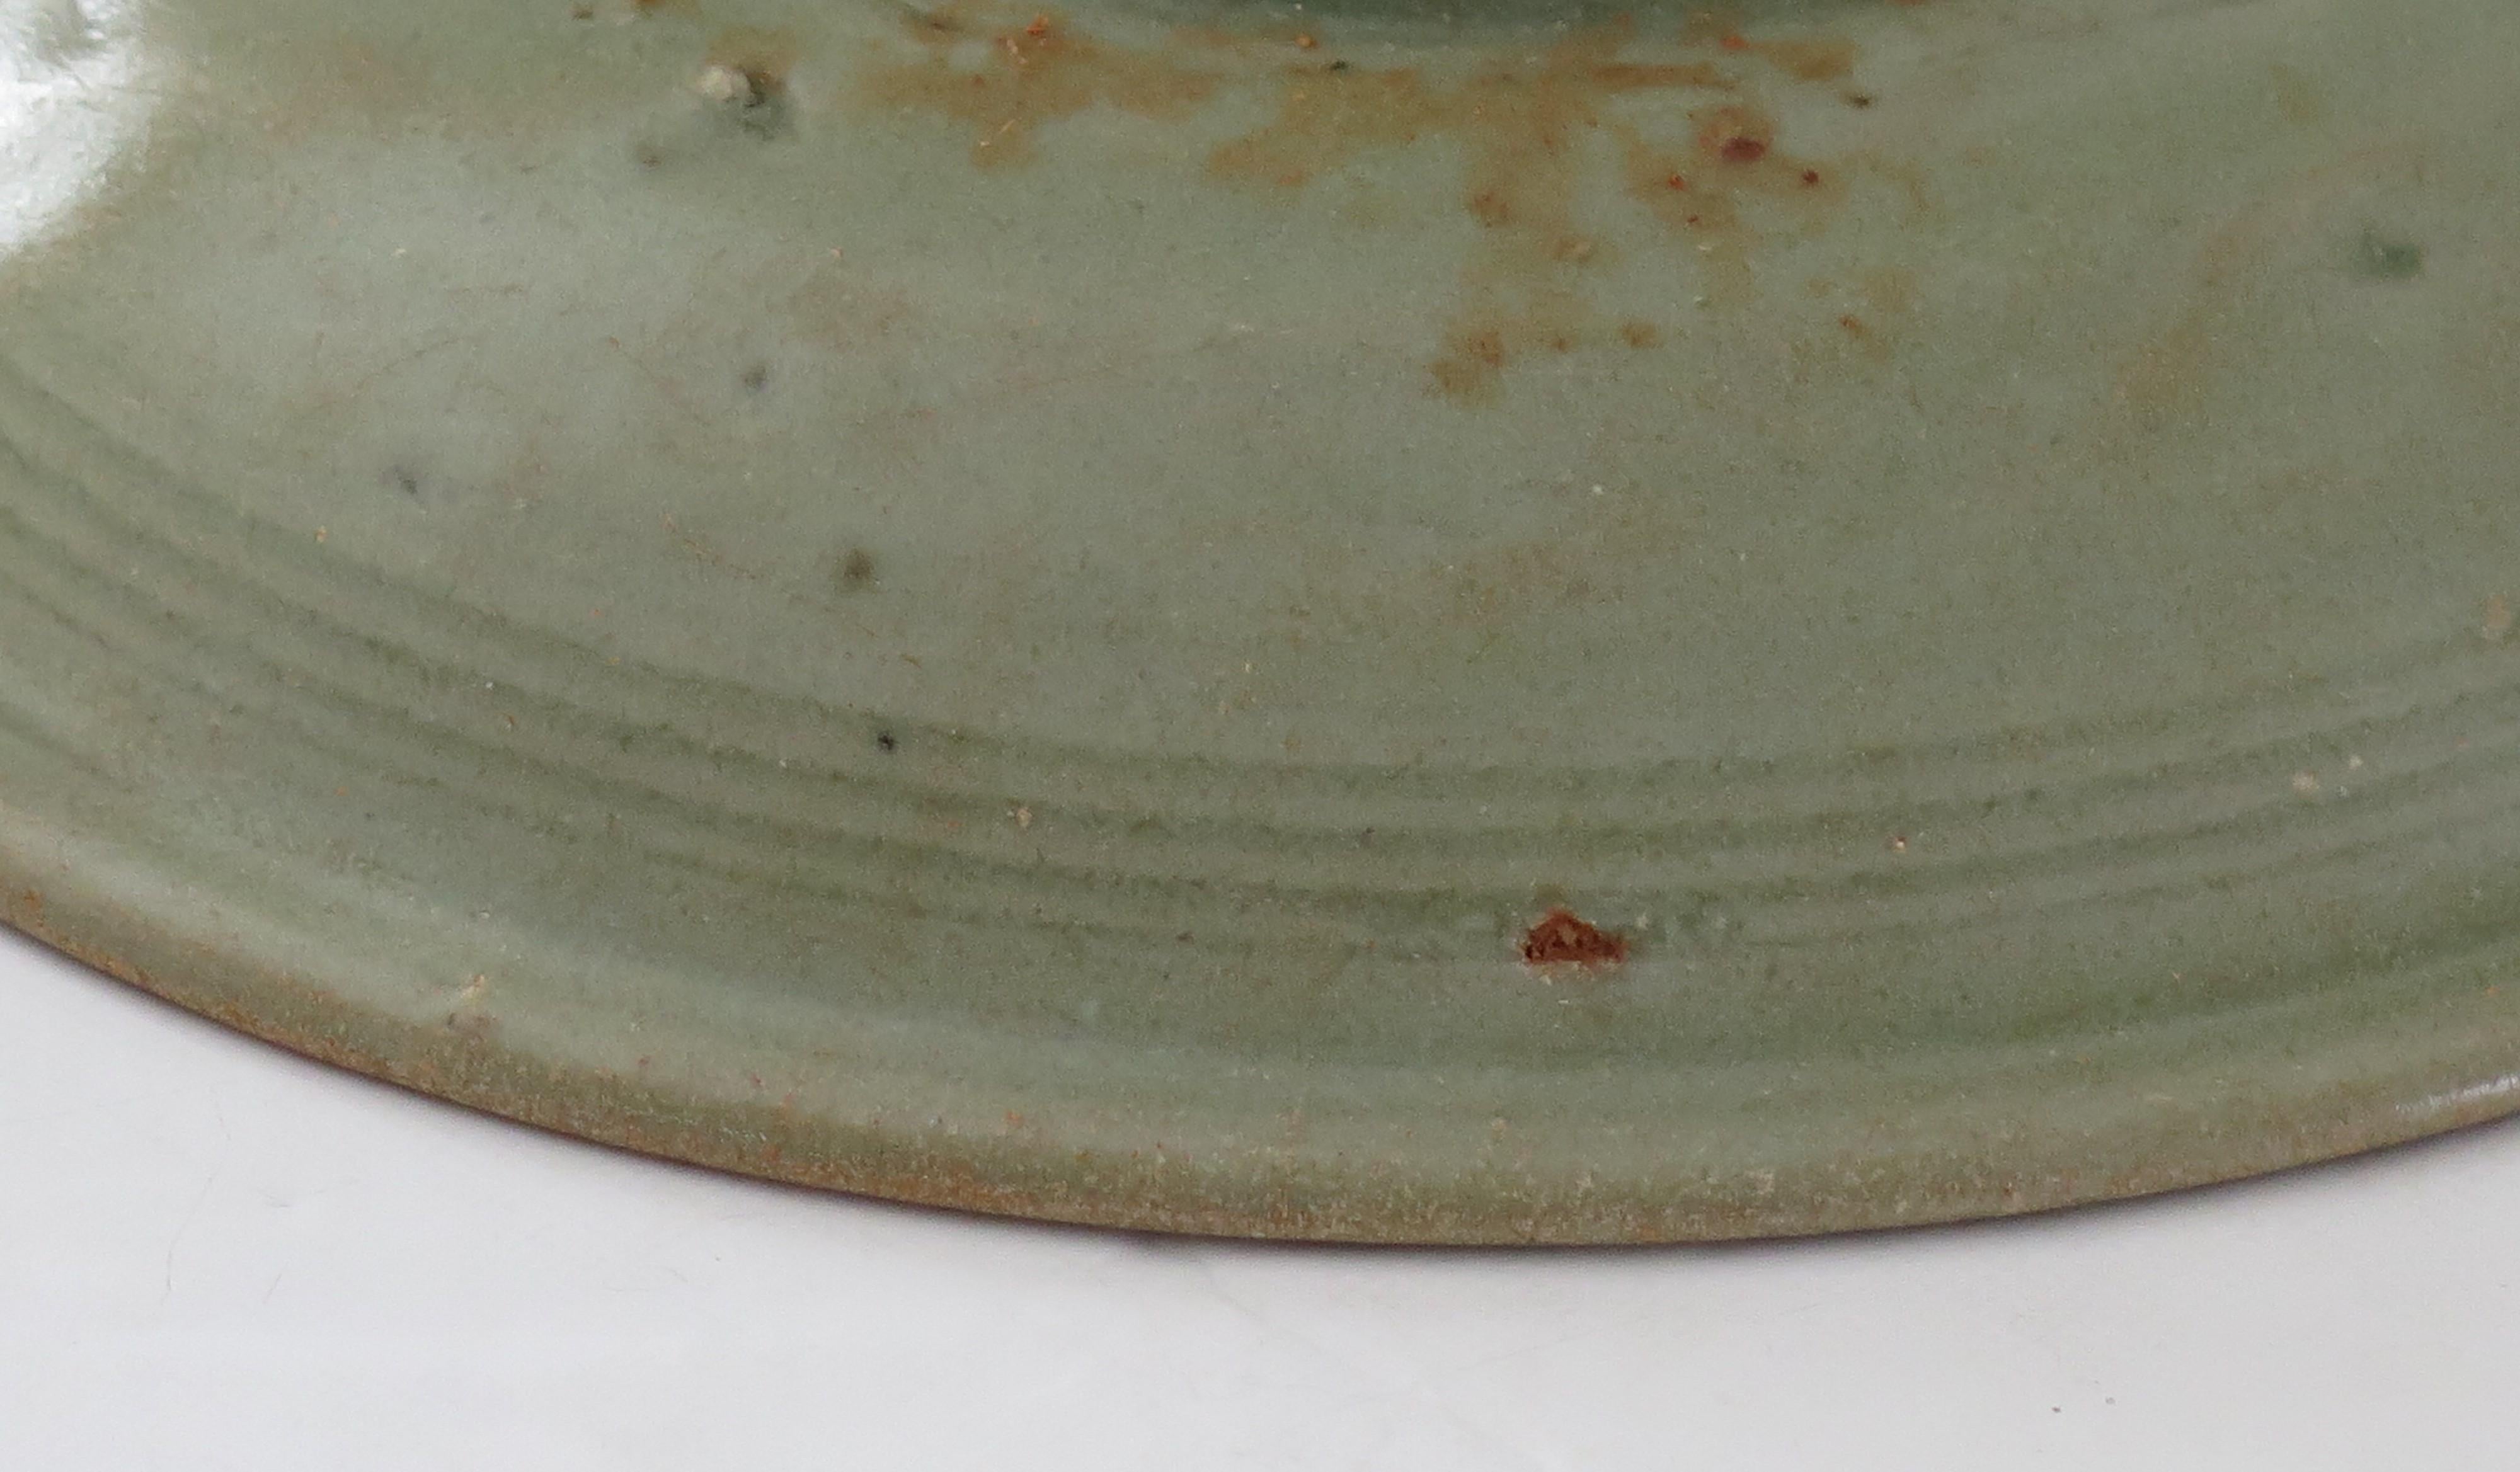 Chinese Stoneware Bowl or Dish Longquan Celadon Incised, Yuan Dynasty 1271-1368 In Good Condition For Sale In Lincoln, Lincolnshire